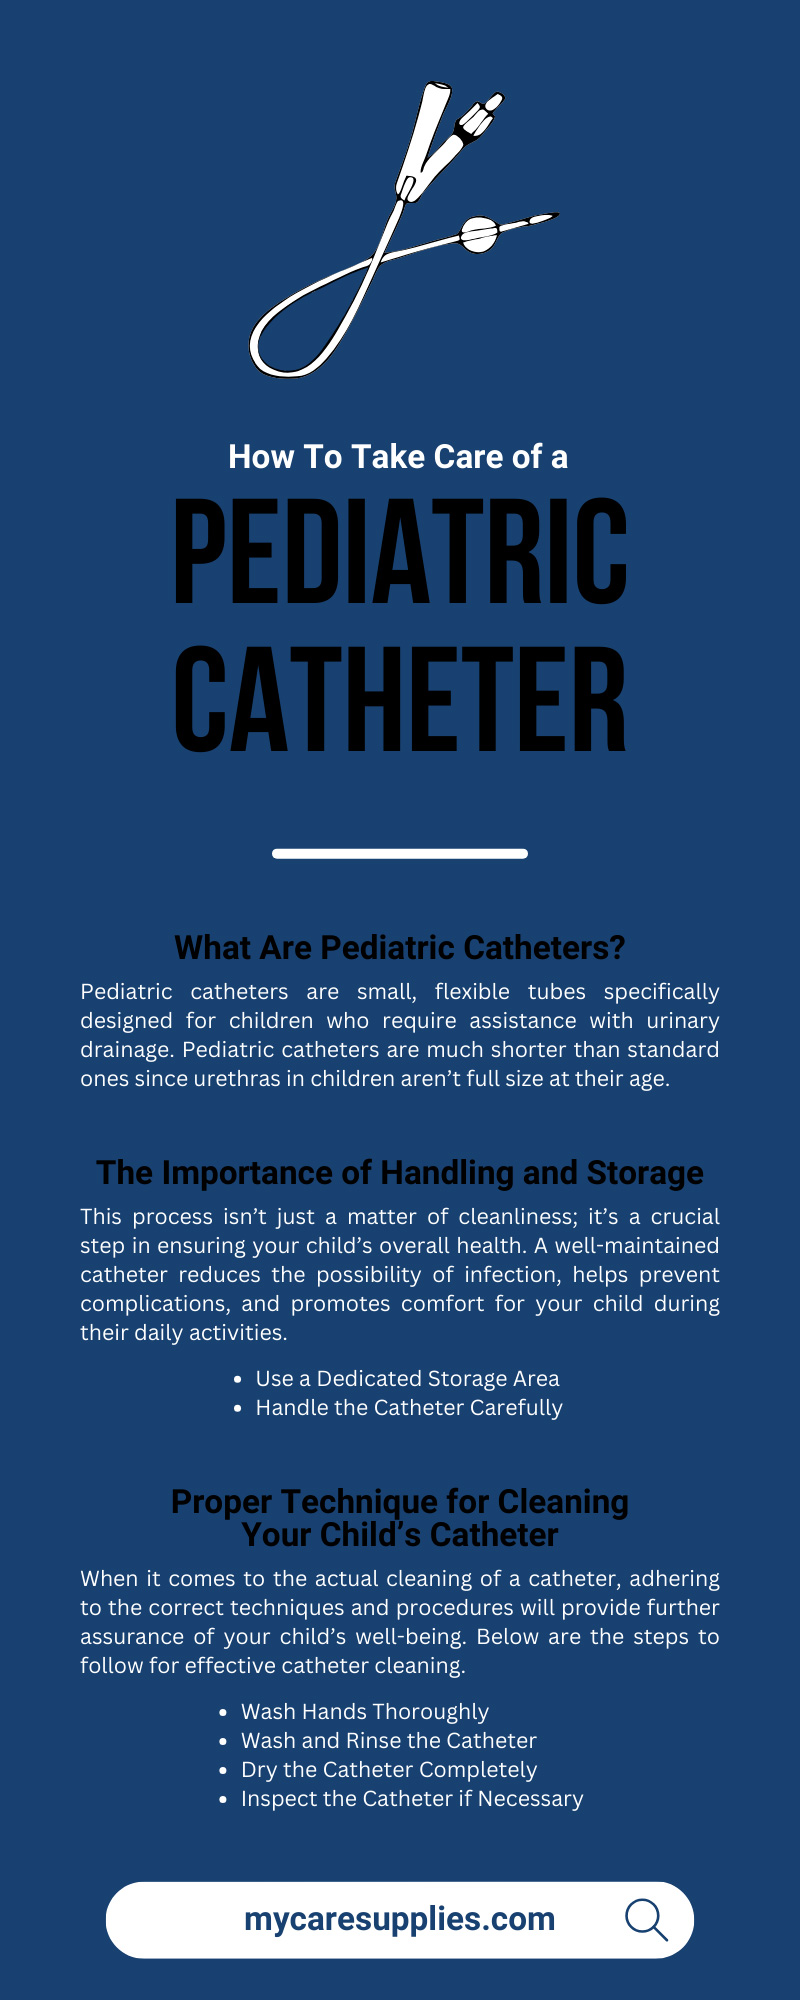 How To Take Care of a Pediatric Catheter